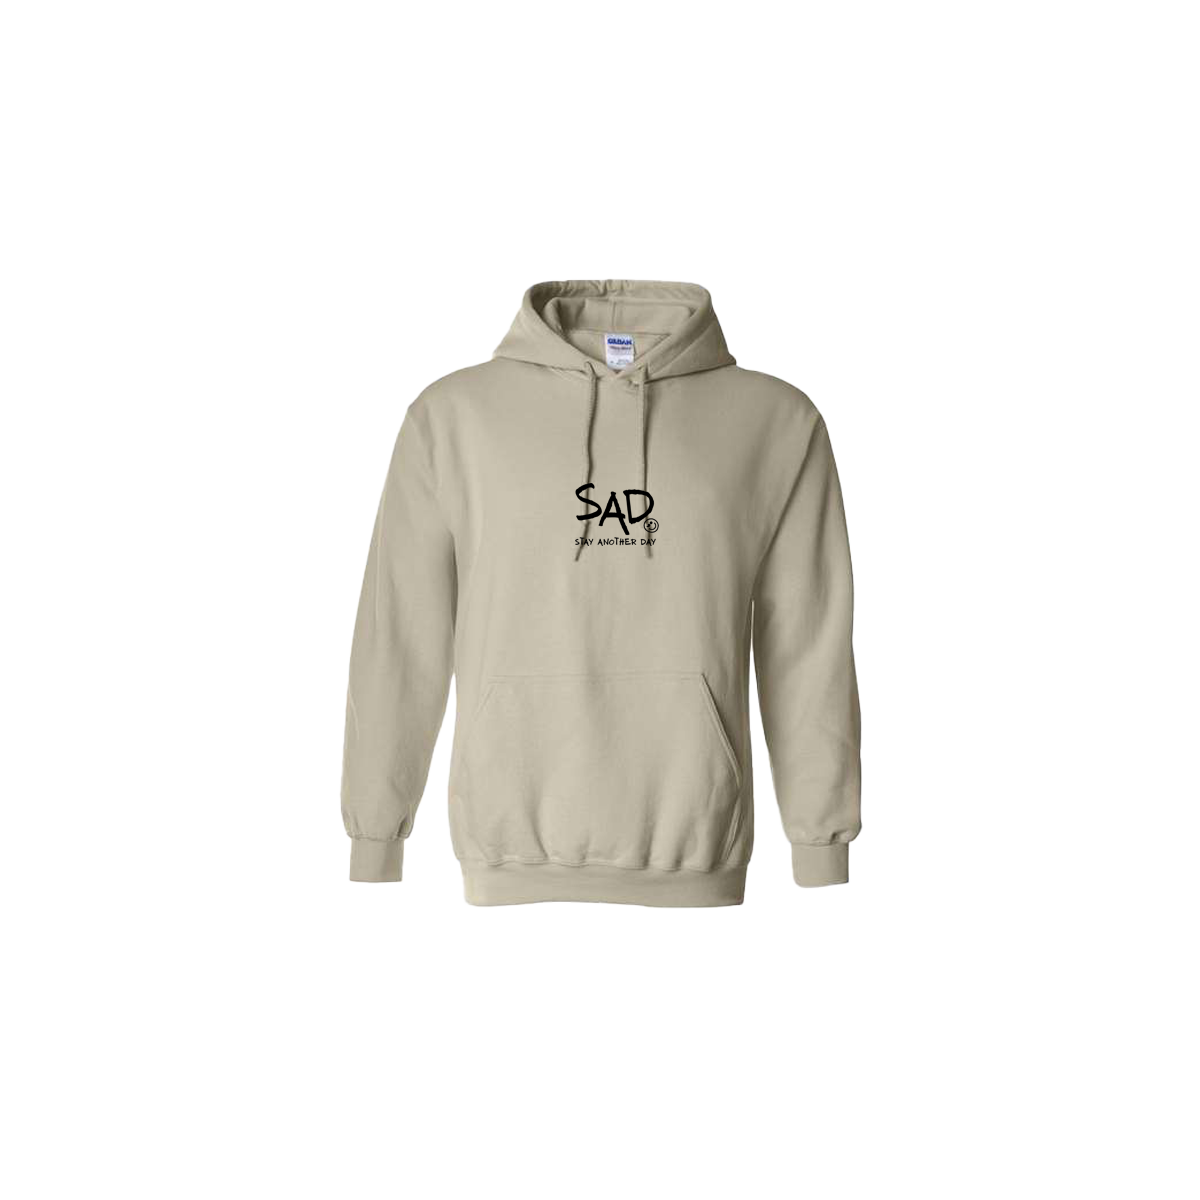 Stay Another Day - SAD Logo Embroidered Beige Hoodie - Mental Health Awareness Clothing